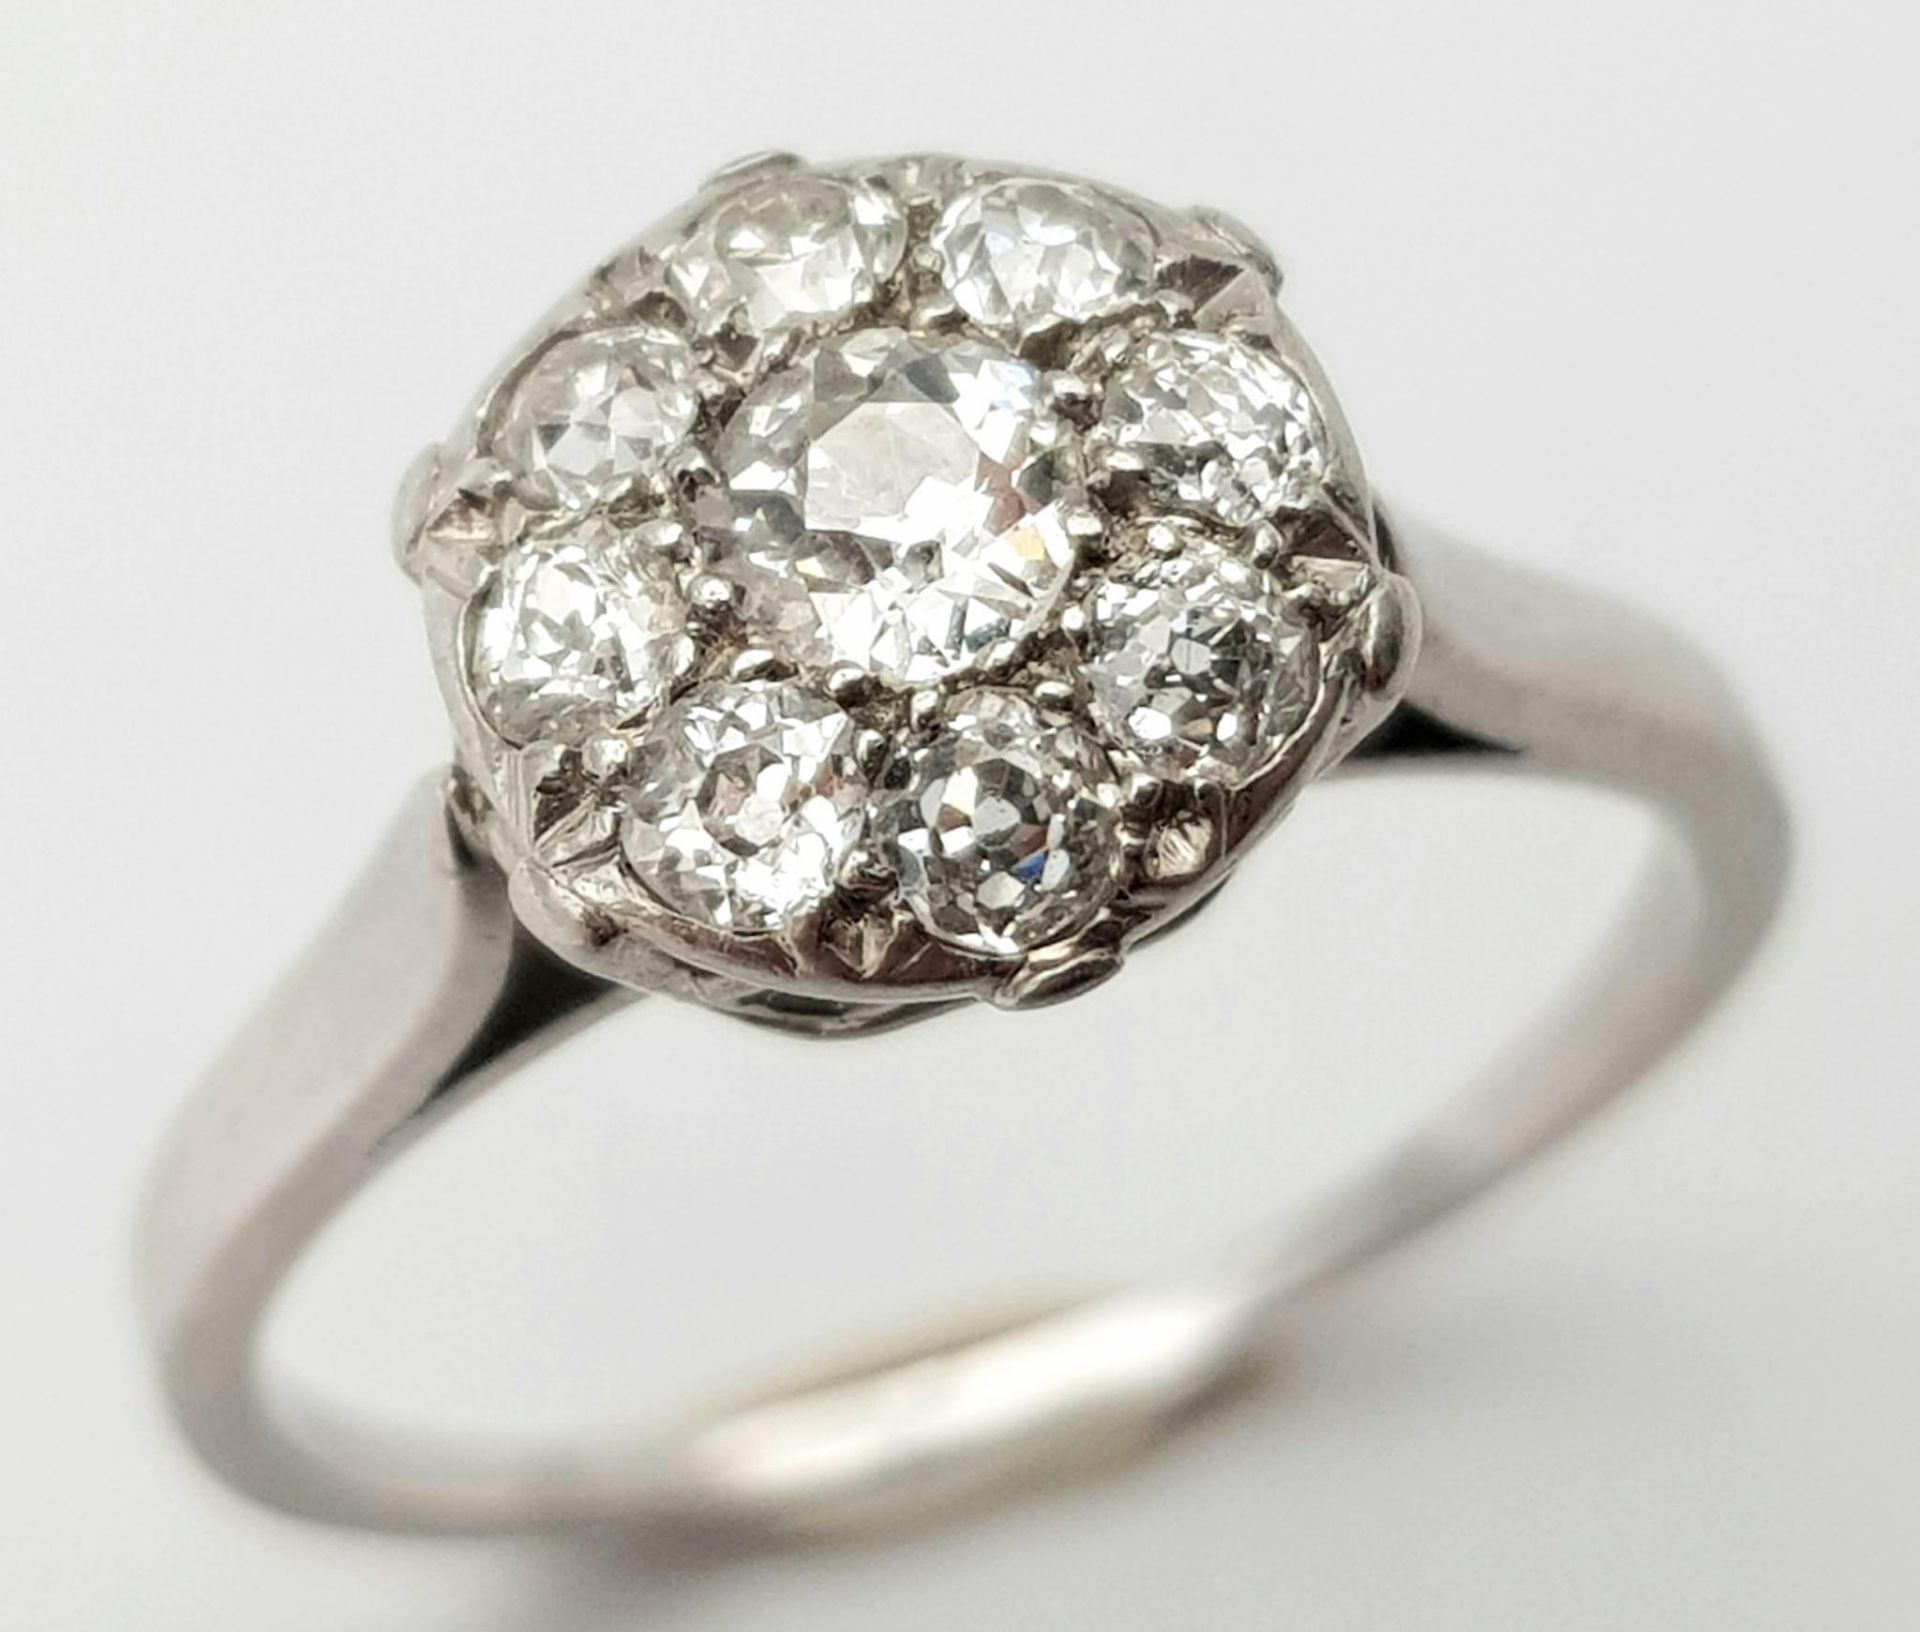 A LOVELY PLATINUM VINTAGE DIAMOND RING WITH APPROX 1.10CT OLD CUT DIAMONDS, WEIGHT 3.6G SIZE O - Image 5 of 9